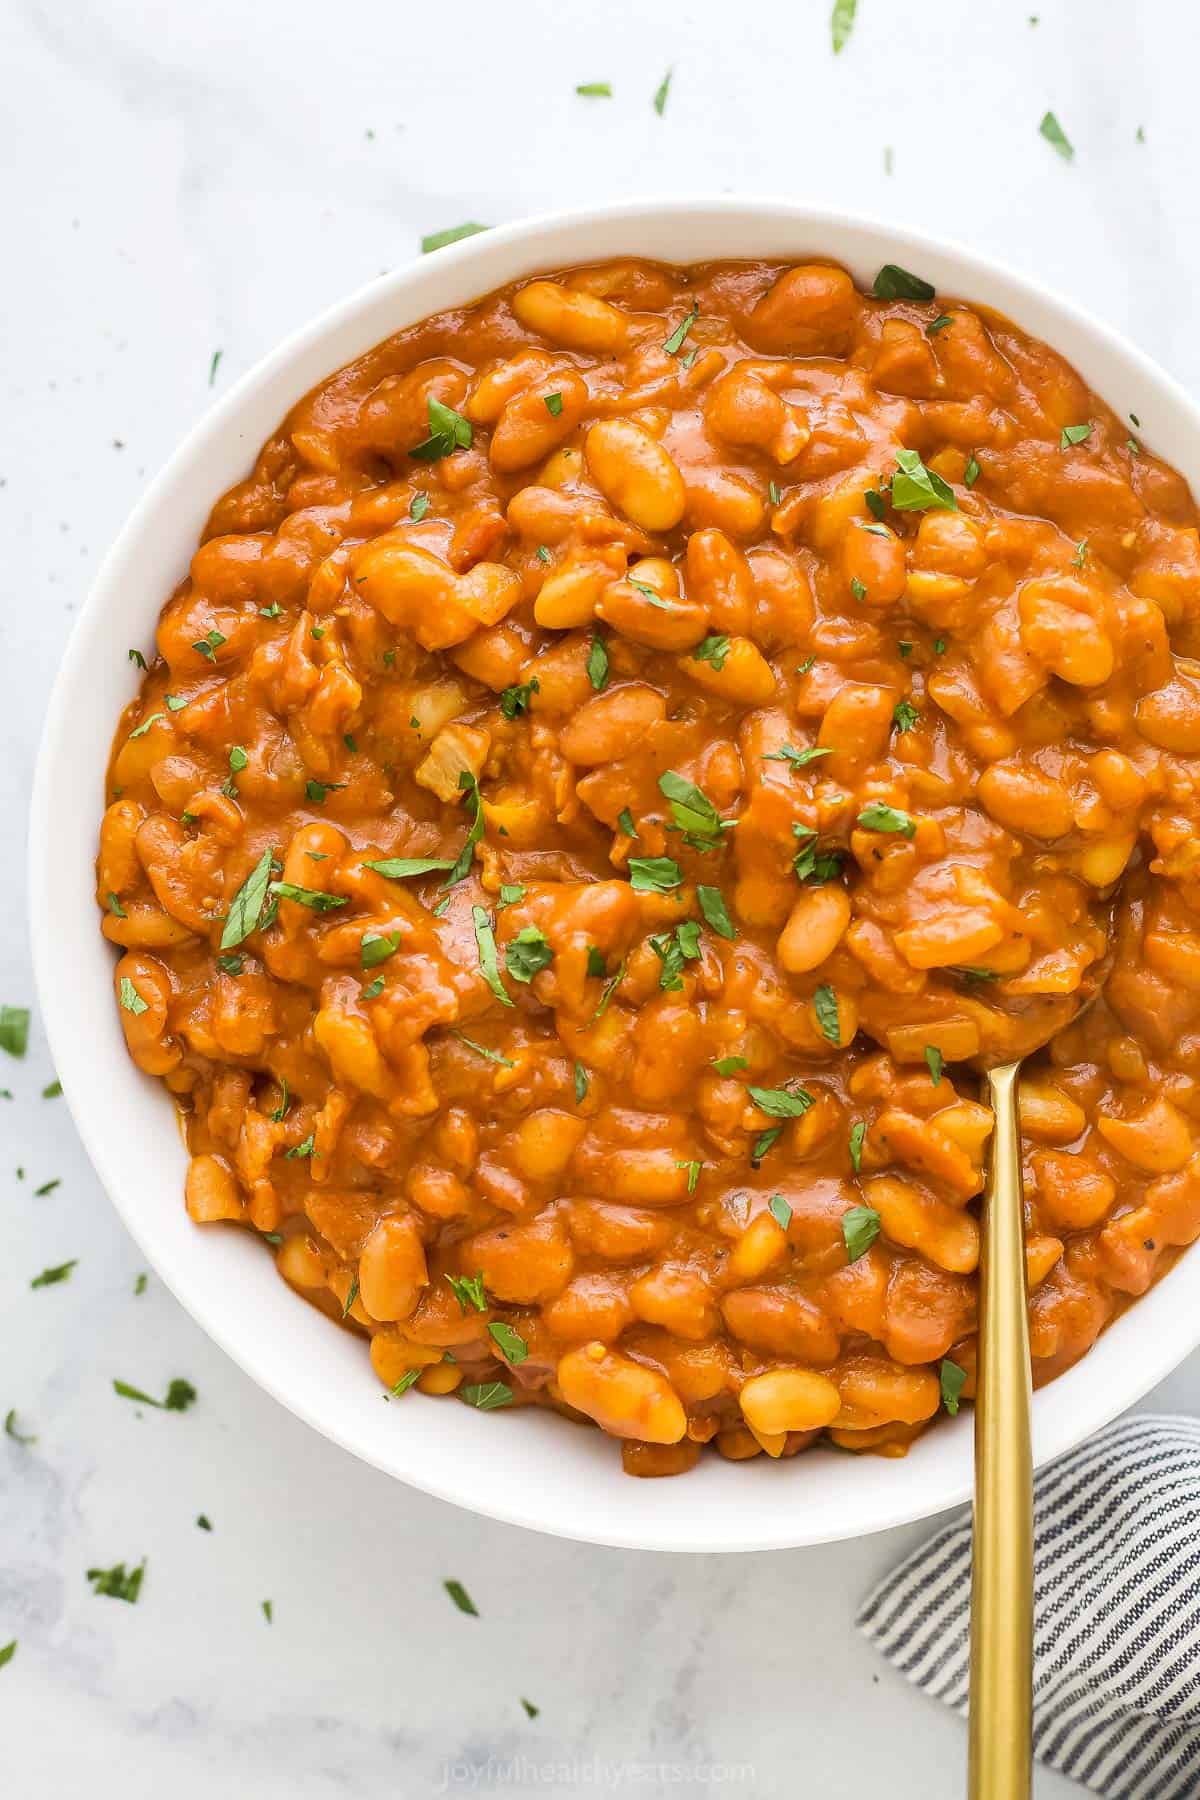 A big bowl of baked beans on a marble countertop with a striped dishtowel beside it